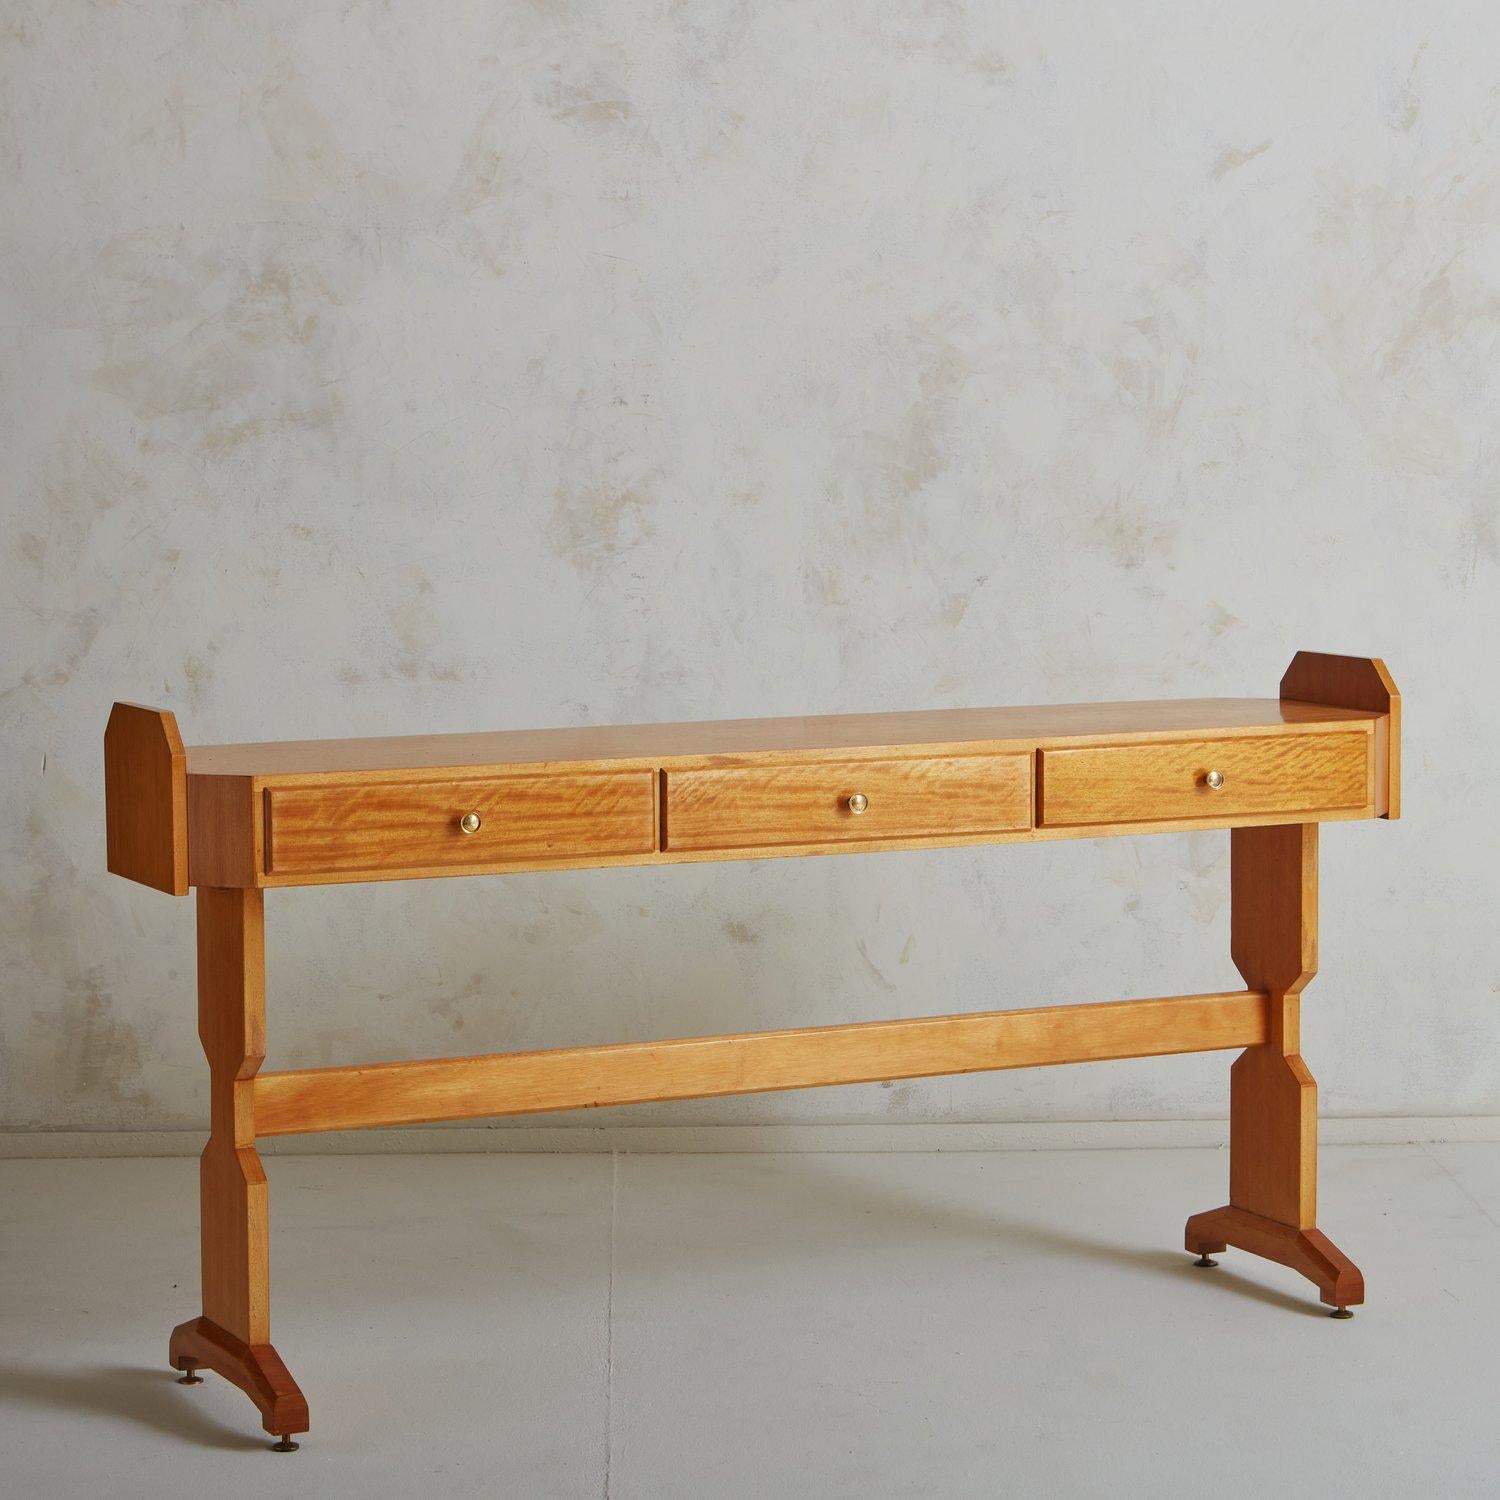 A 1970s Italian console table in the style of Vittorio Dassi. This table was constructed using maple wood with delicate graining. It has a rectangular tabletop with three drawers and circular brass hardware. It stands on sculpturally carved legs